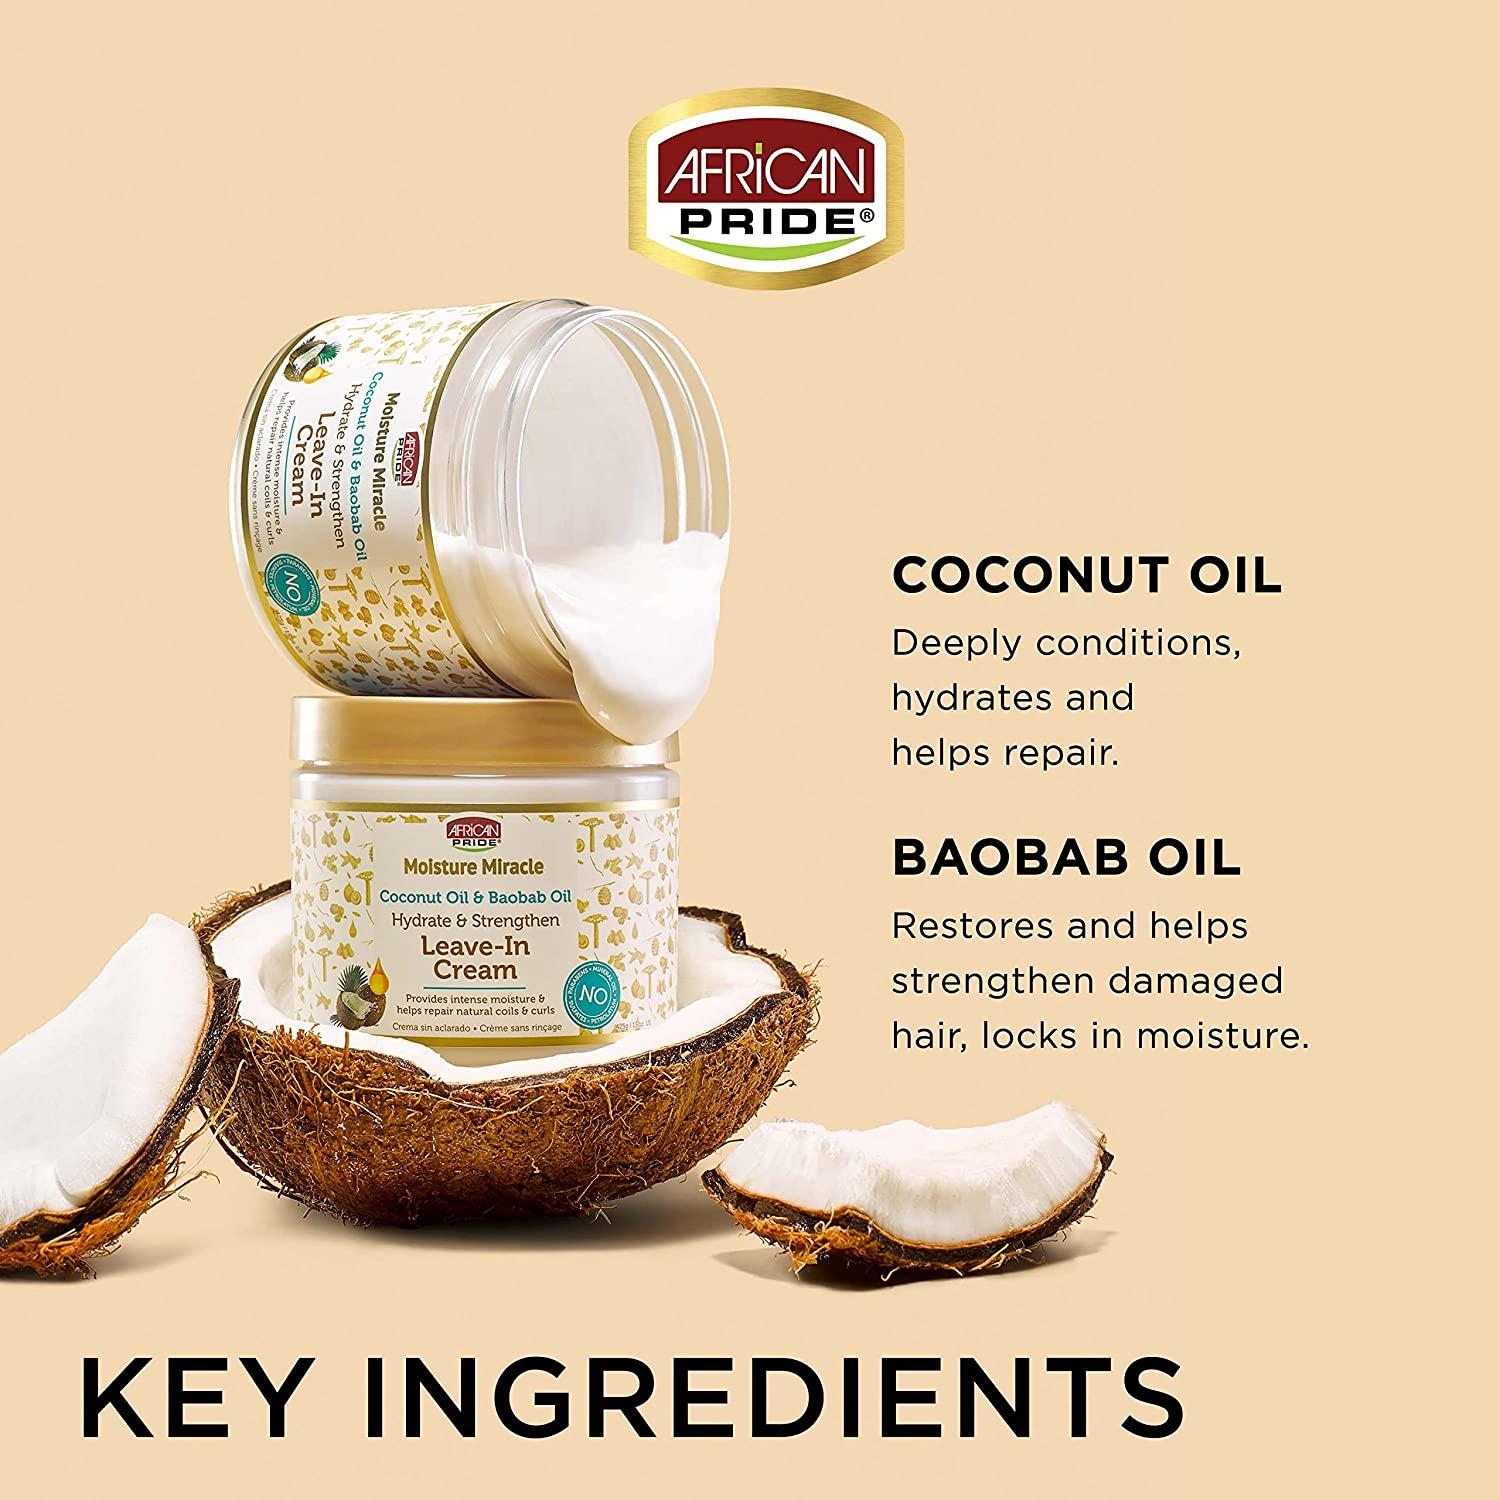 African Pride Moisture Miracle Coconut Oil & Baobab Oil Leave-In Hair Cream  (3 Pack) - Provides Intense Moisture & Helps Repair Natural Coils & Curls,  Hydrates & Strengthens, 15 oz Coconut 15